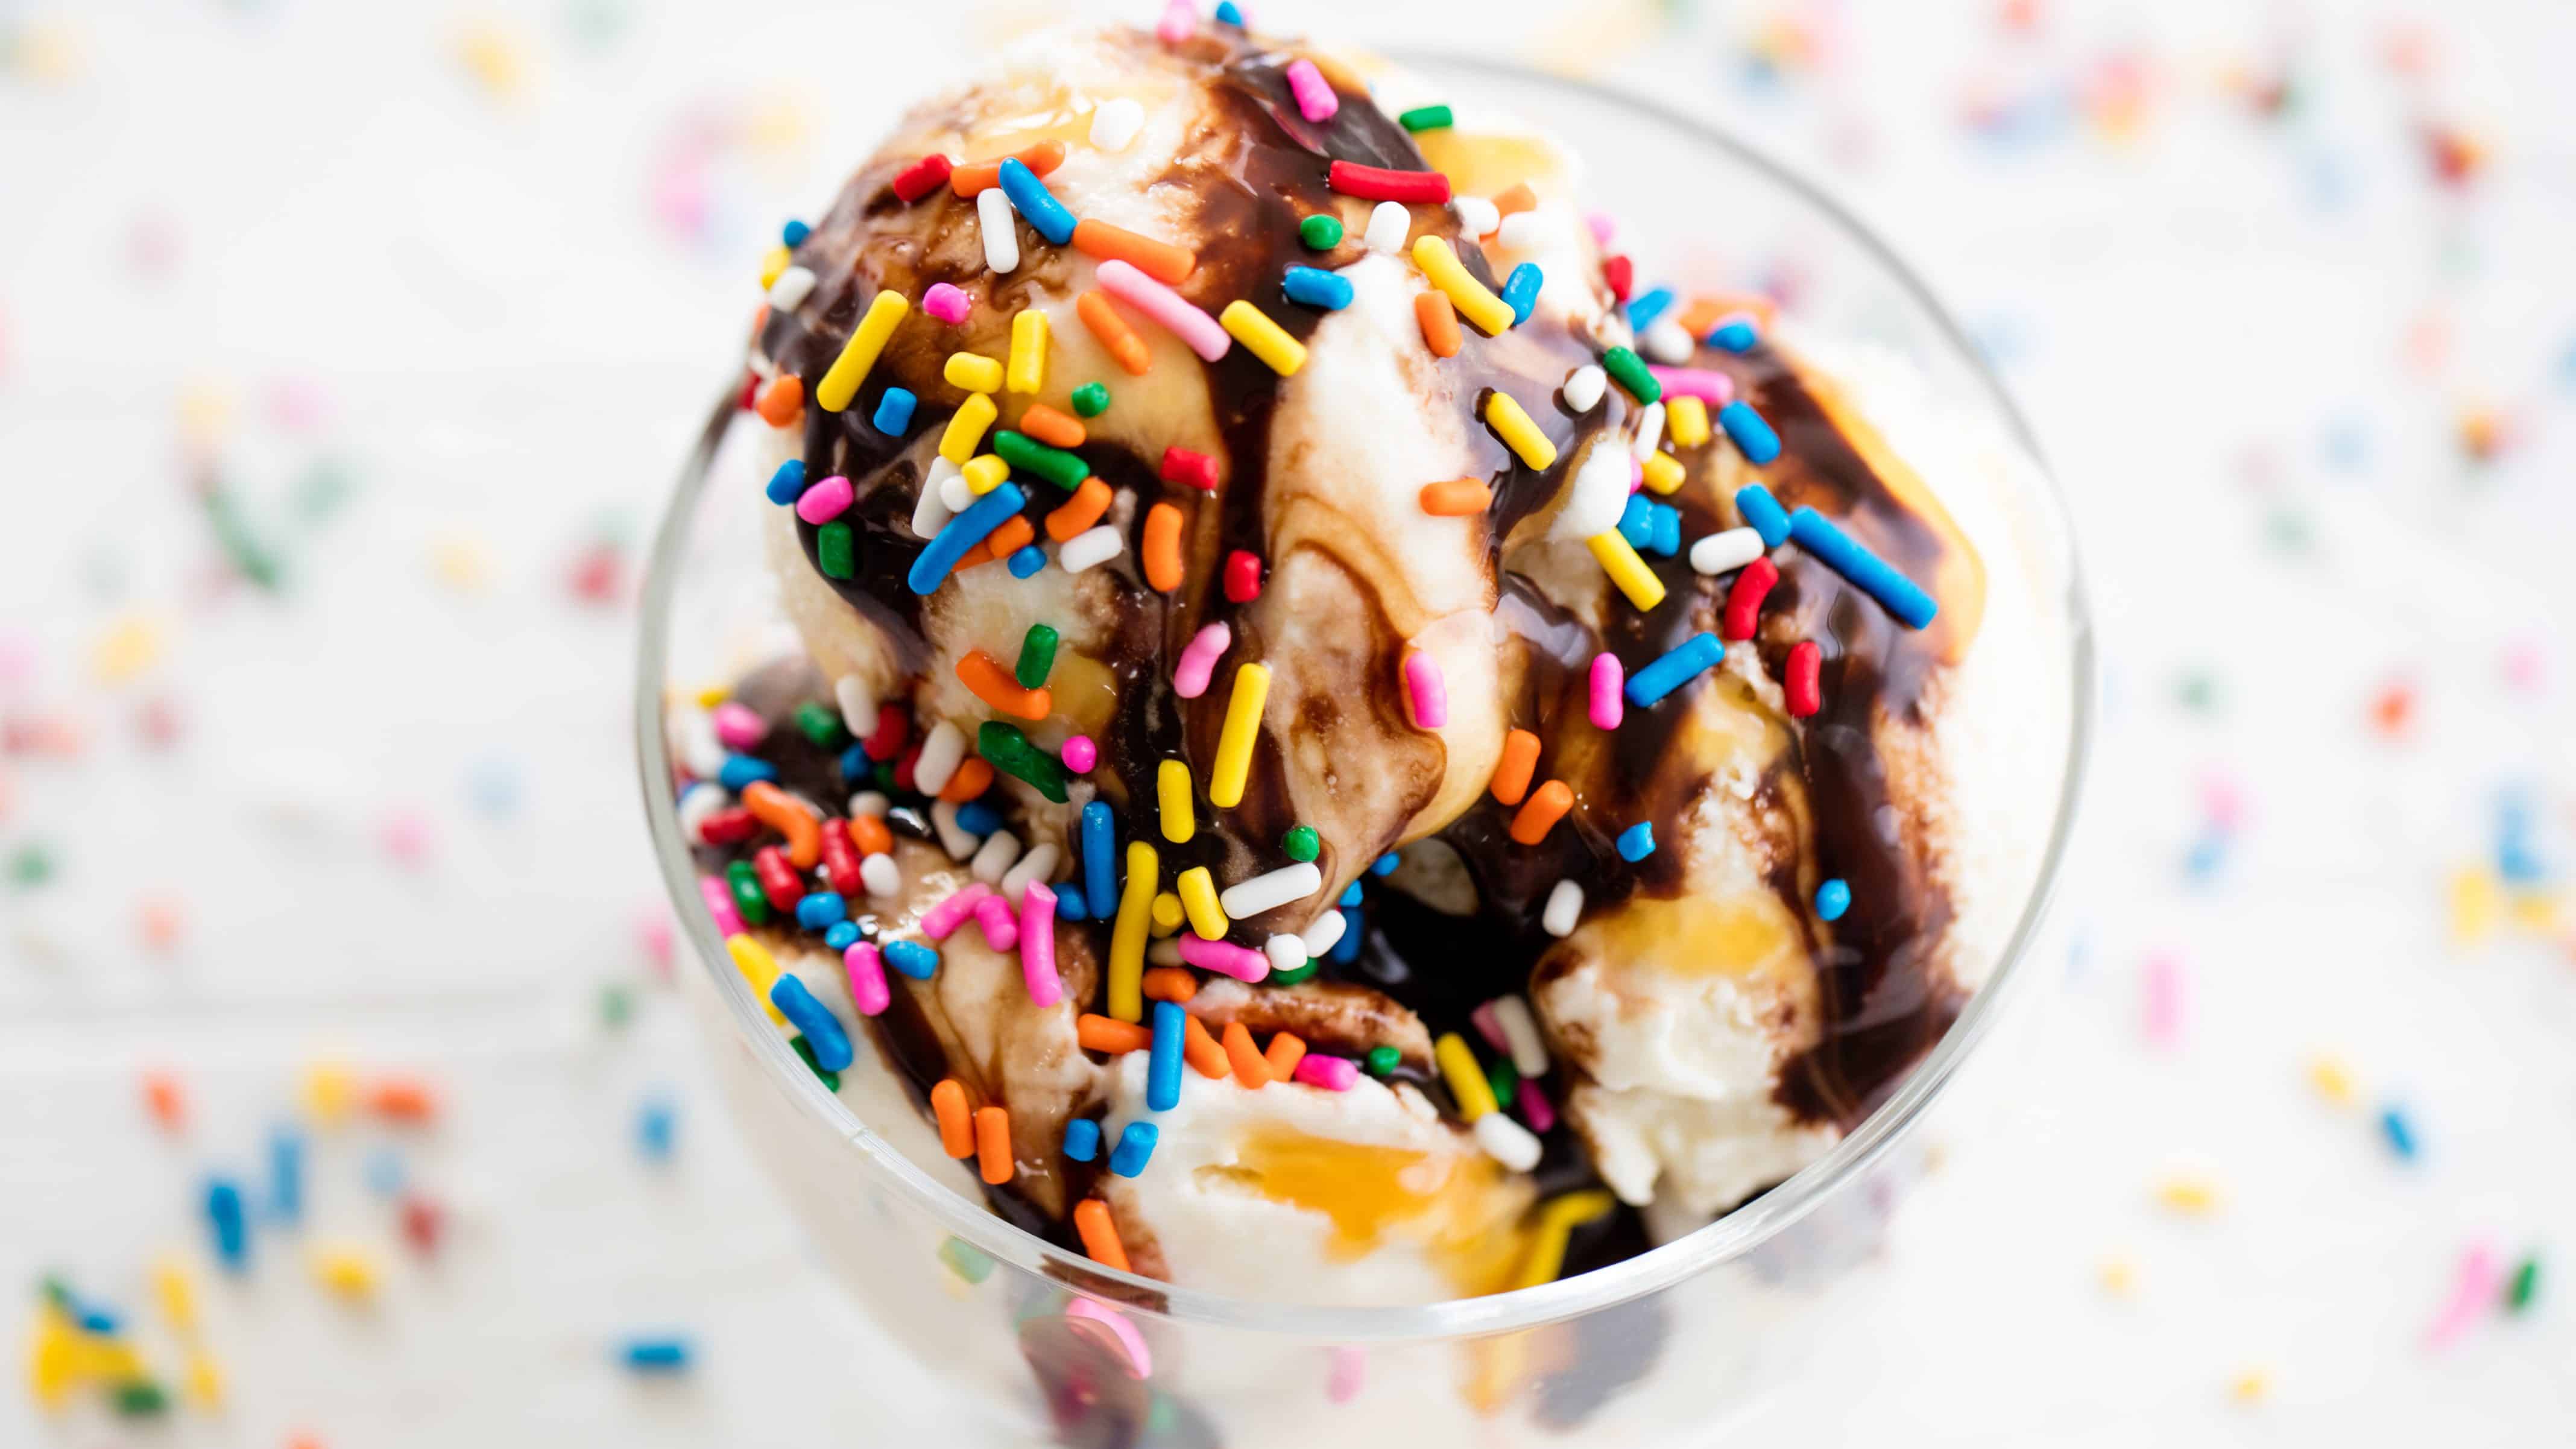 Homemade ice cream topped with chocolate syrup and sprinkles.